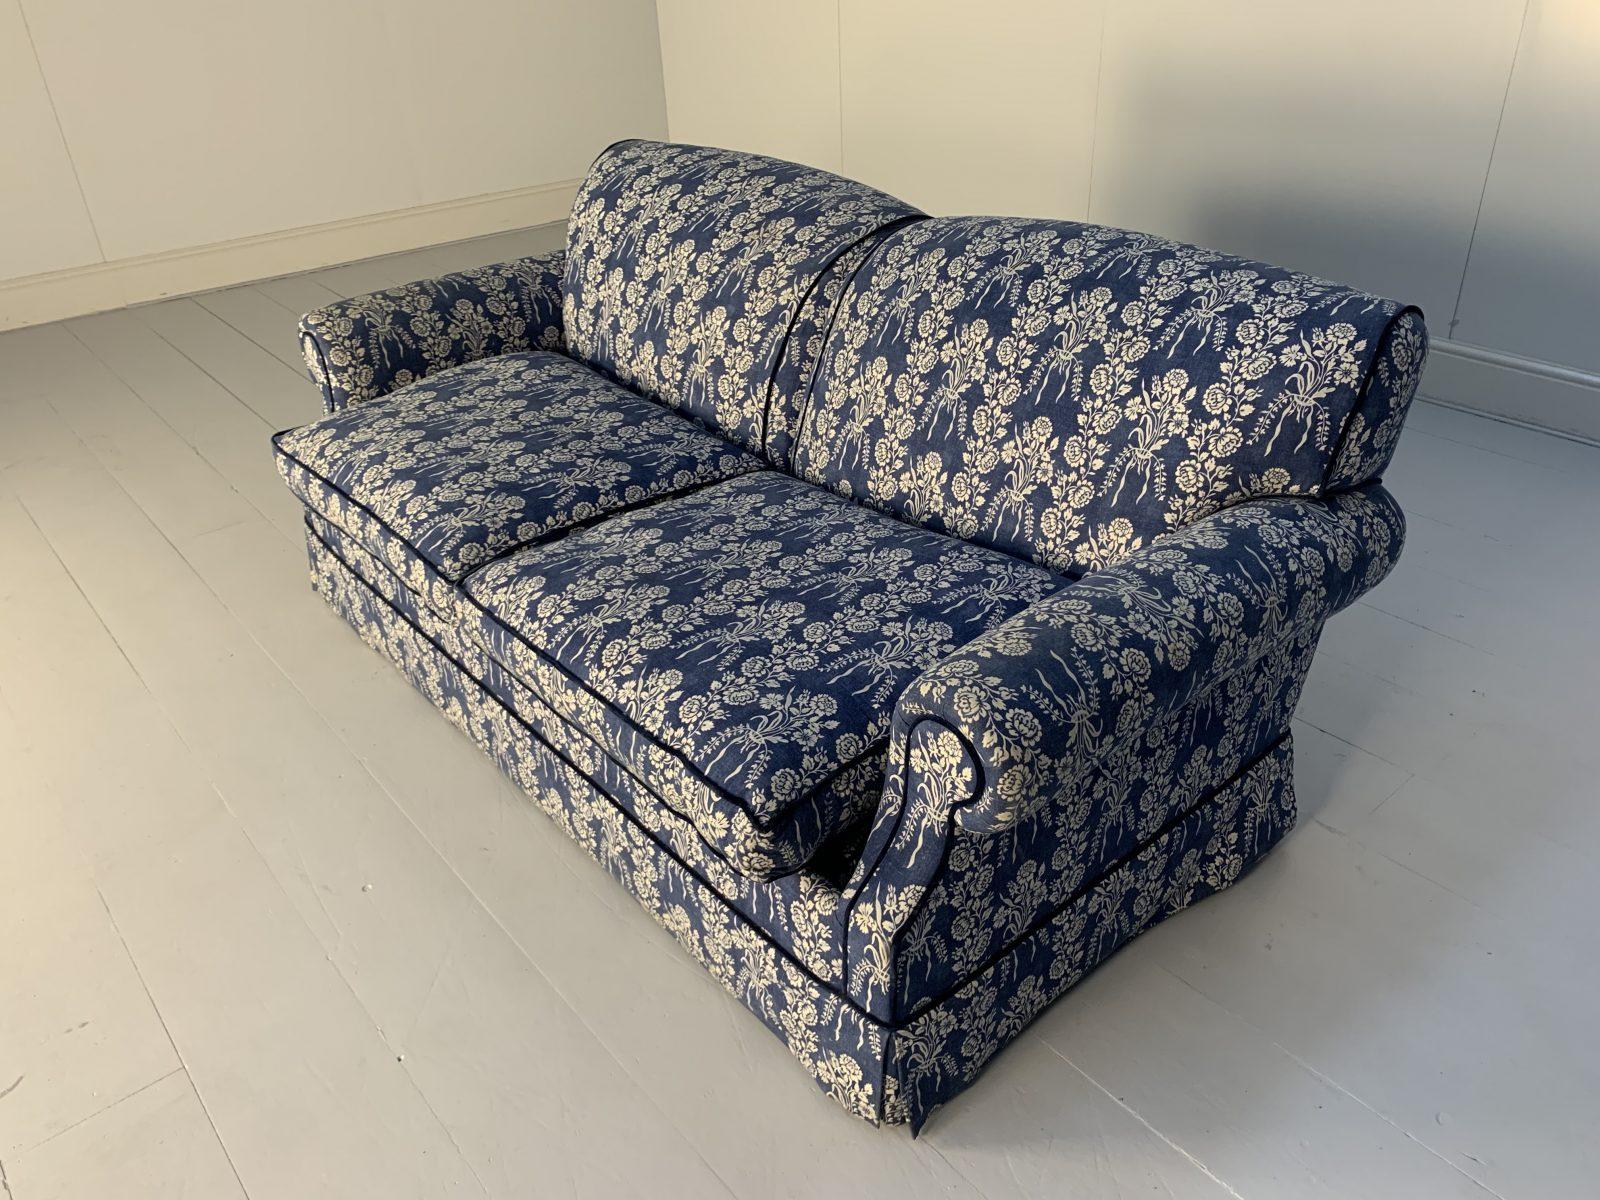 Contemporary William Yeoward “Percy” 2.5-Seat Sofa Bed in Blue Patterned Fabric